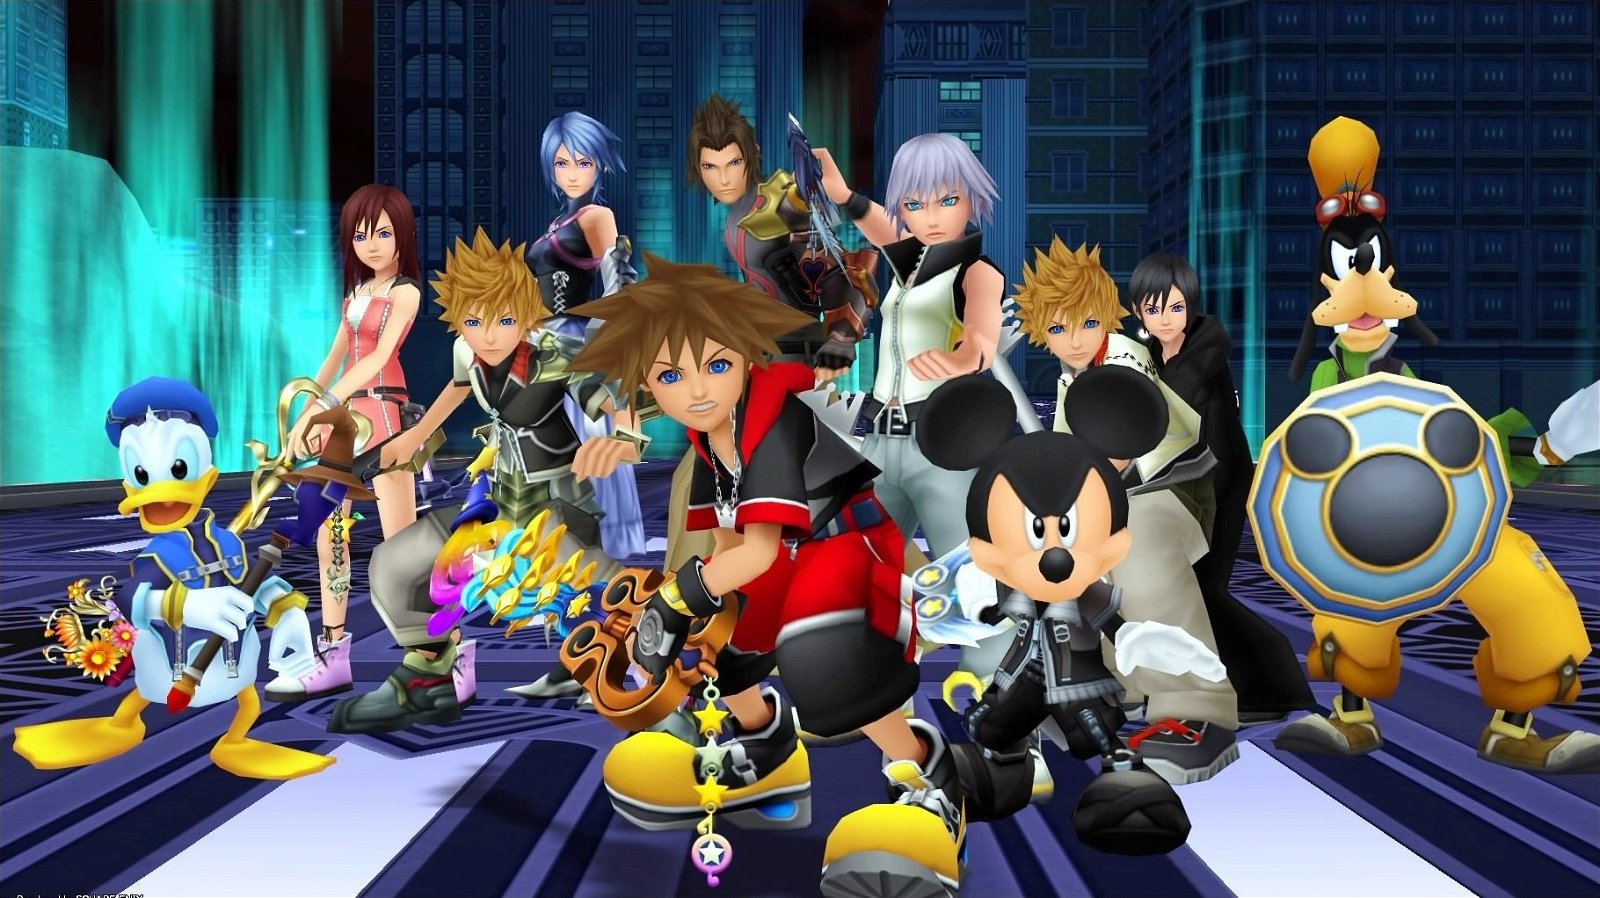 Kingdom Hearts could also arrive at the cinema